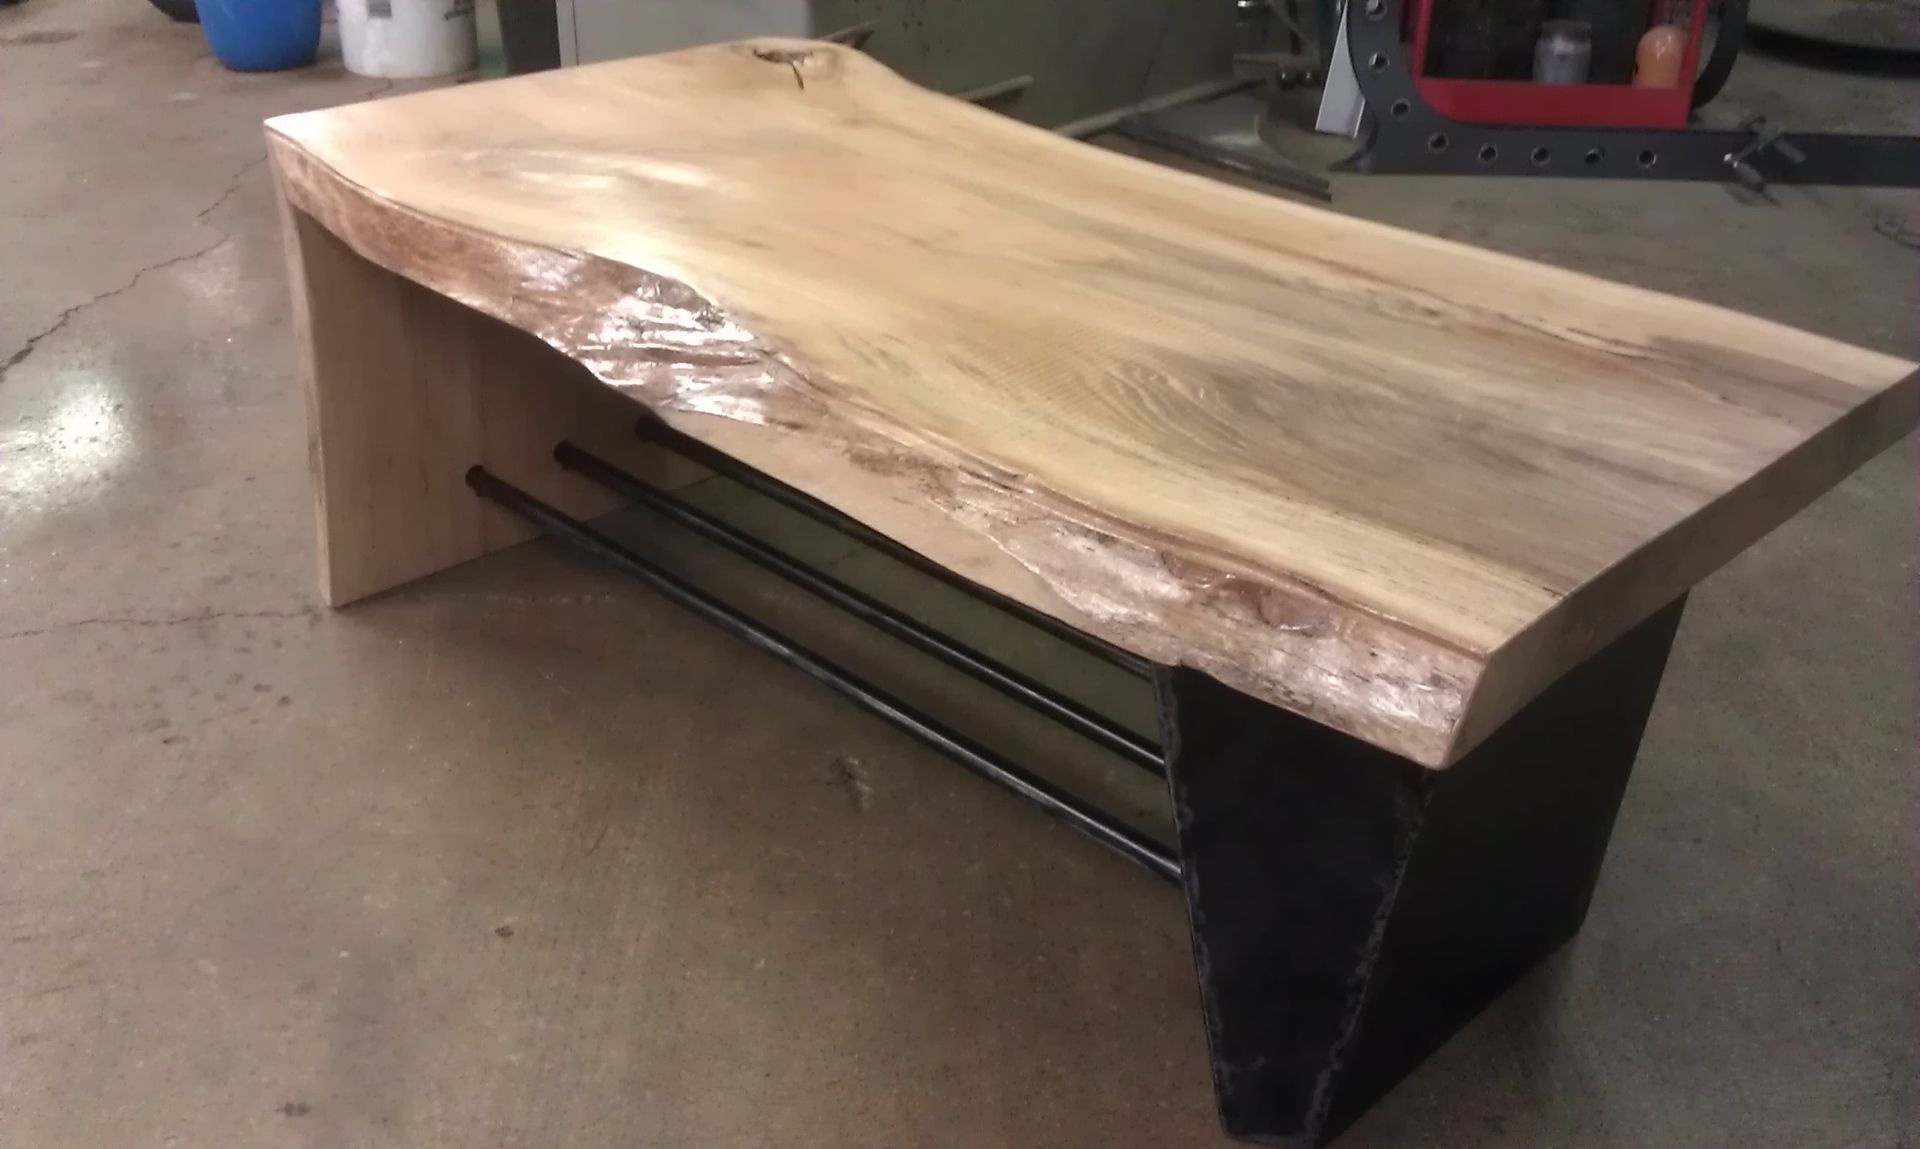 2019 Hand Made Steel And Wood Waterfall Coffee Tableintuitive Iron With Regard To Waterfall Coffee Tables (View 14 of 20)